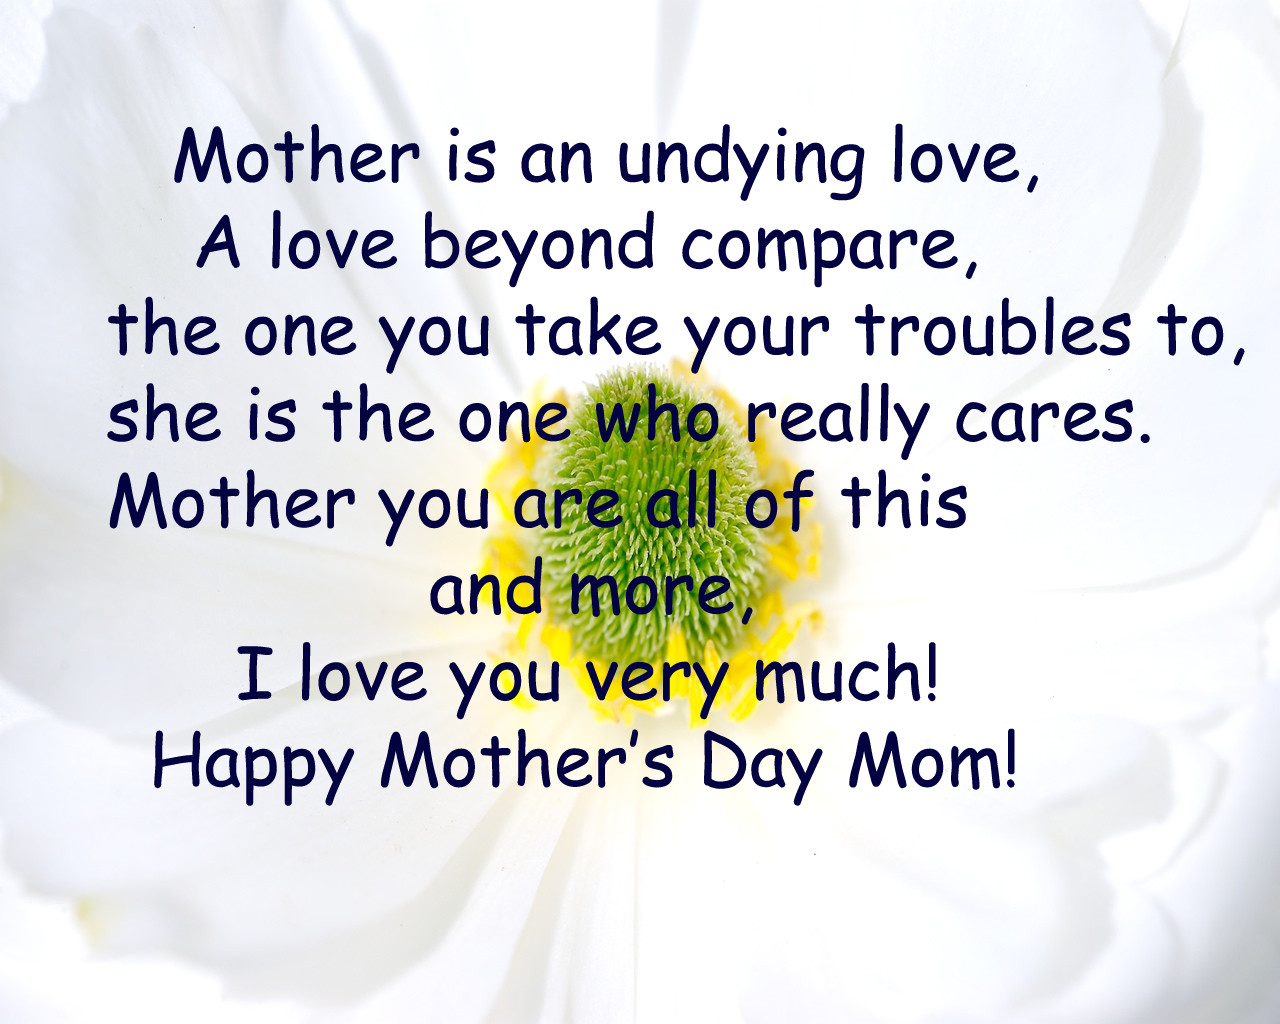 Mothersday Quotes
 Pool Mother s Day Quotes